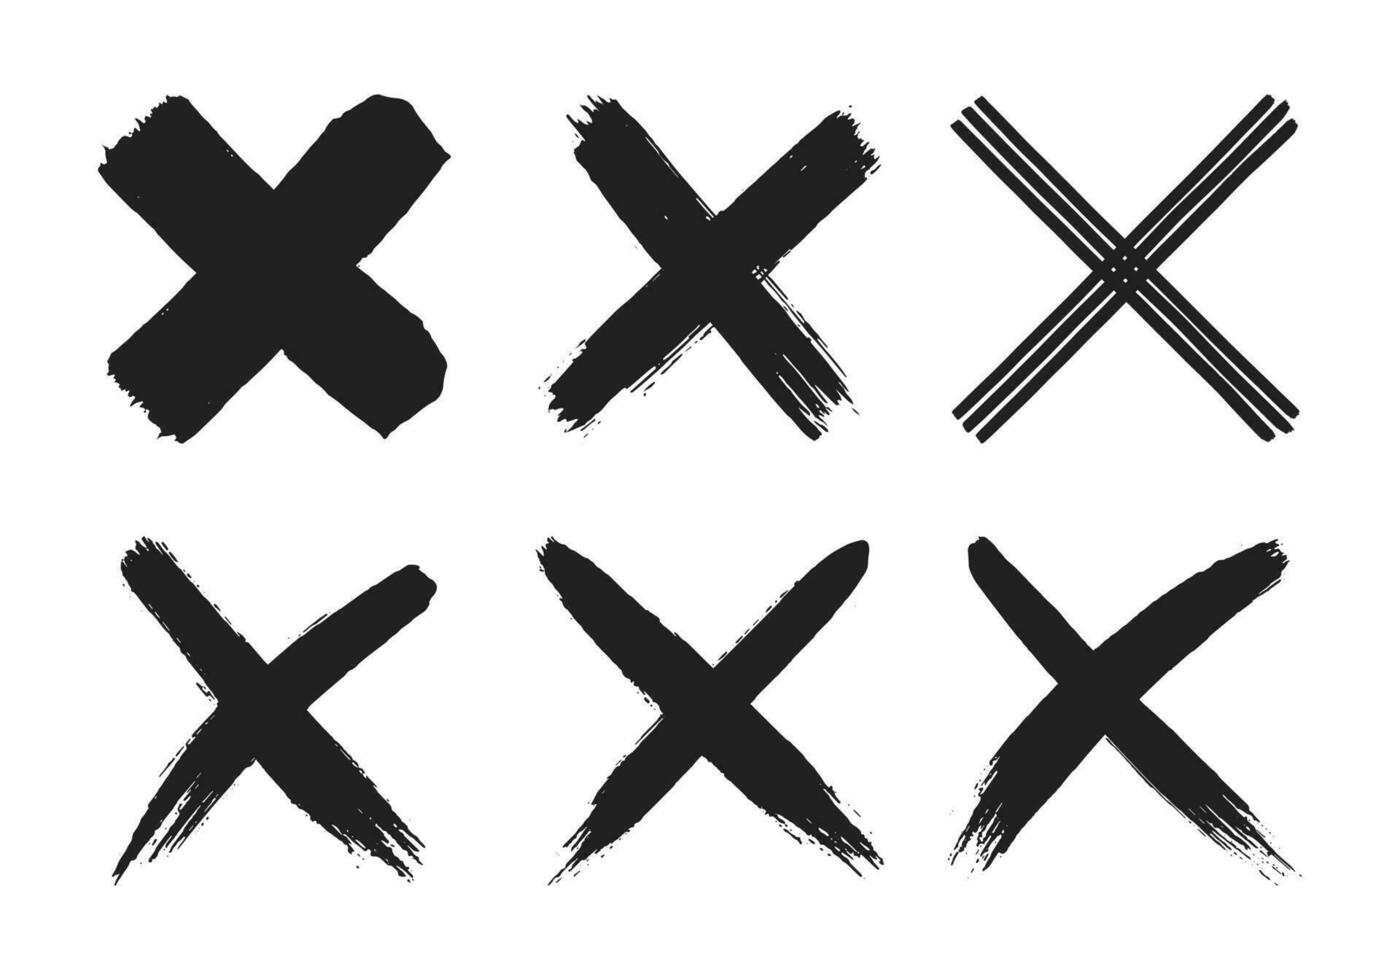 Dirty grunge hand drawn with brush strokes cross x vector illustration icon set.